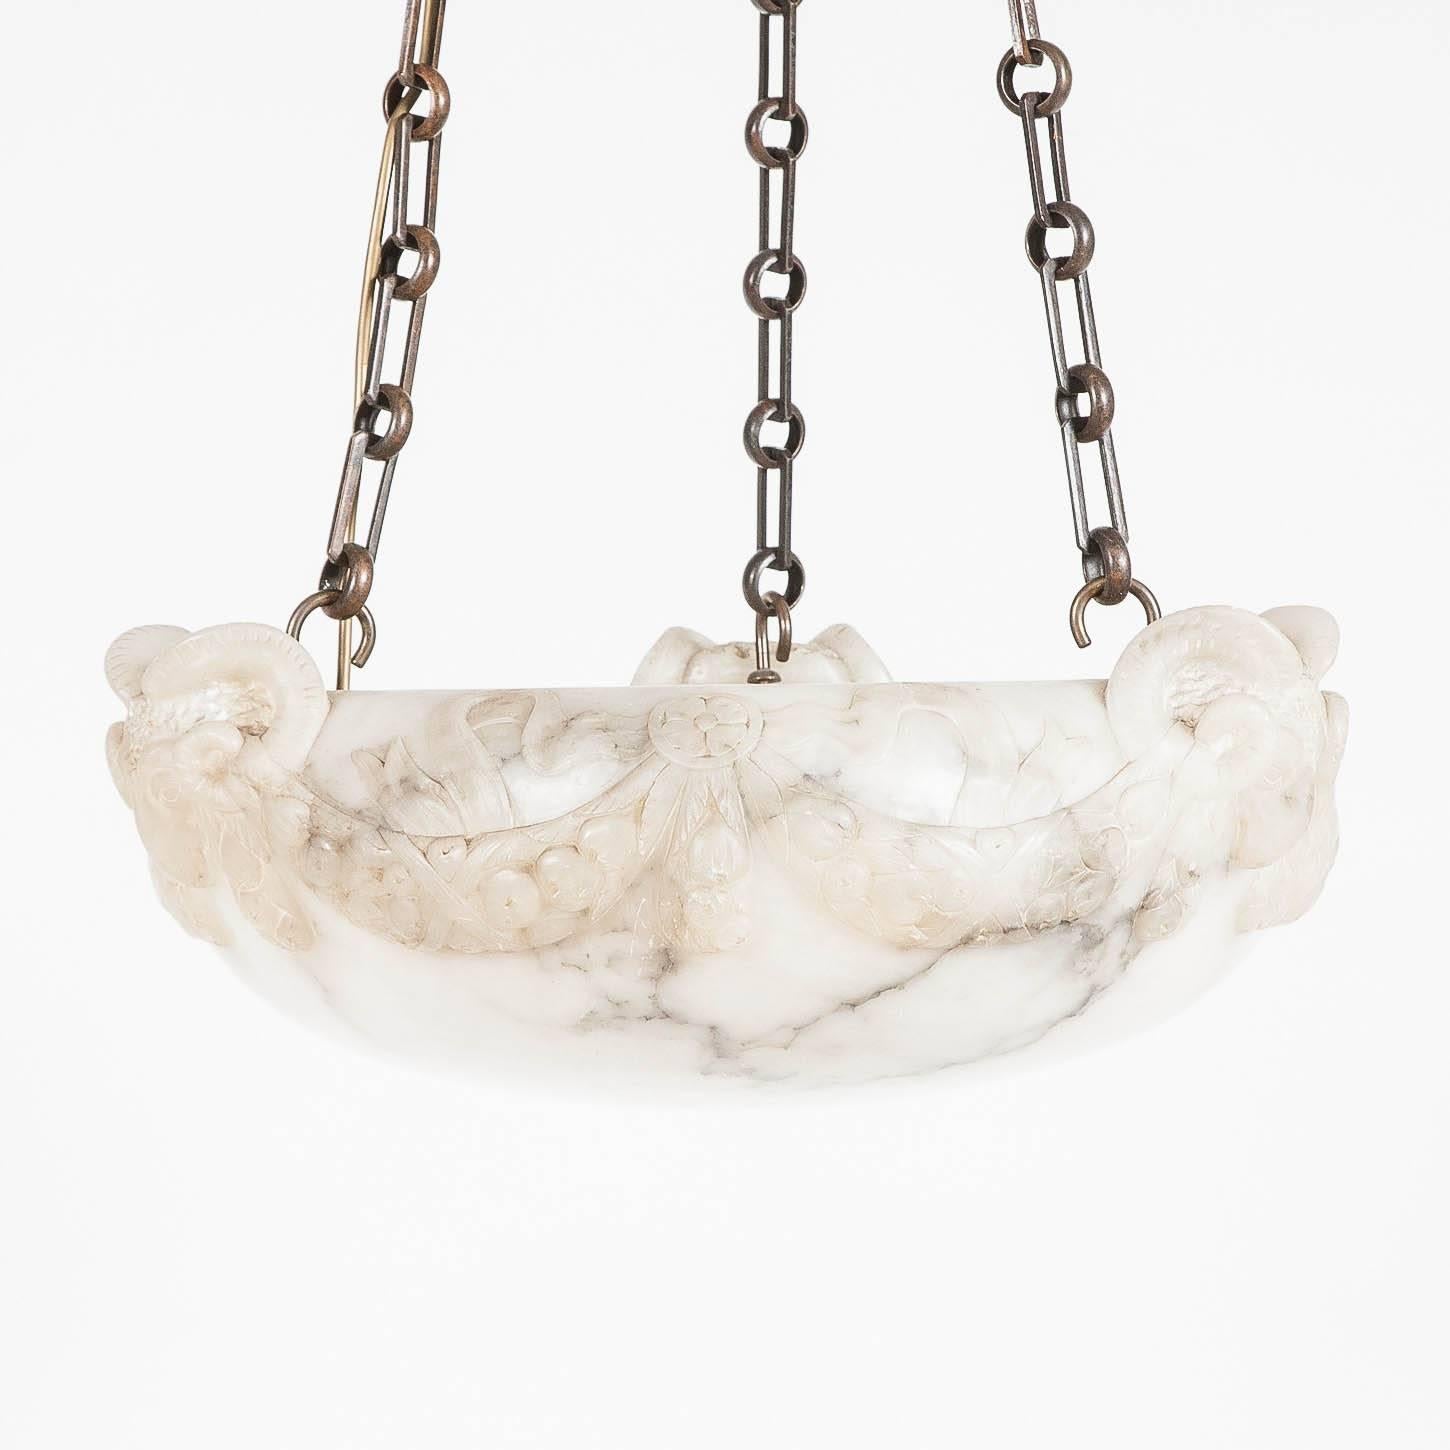 A 1920s white alabaster hanging light with carved ram's heads and floral swag decoration, with later bronze chains and ceiling rose.

Wired for electricity.